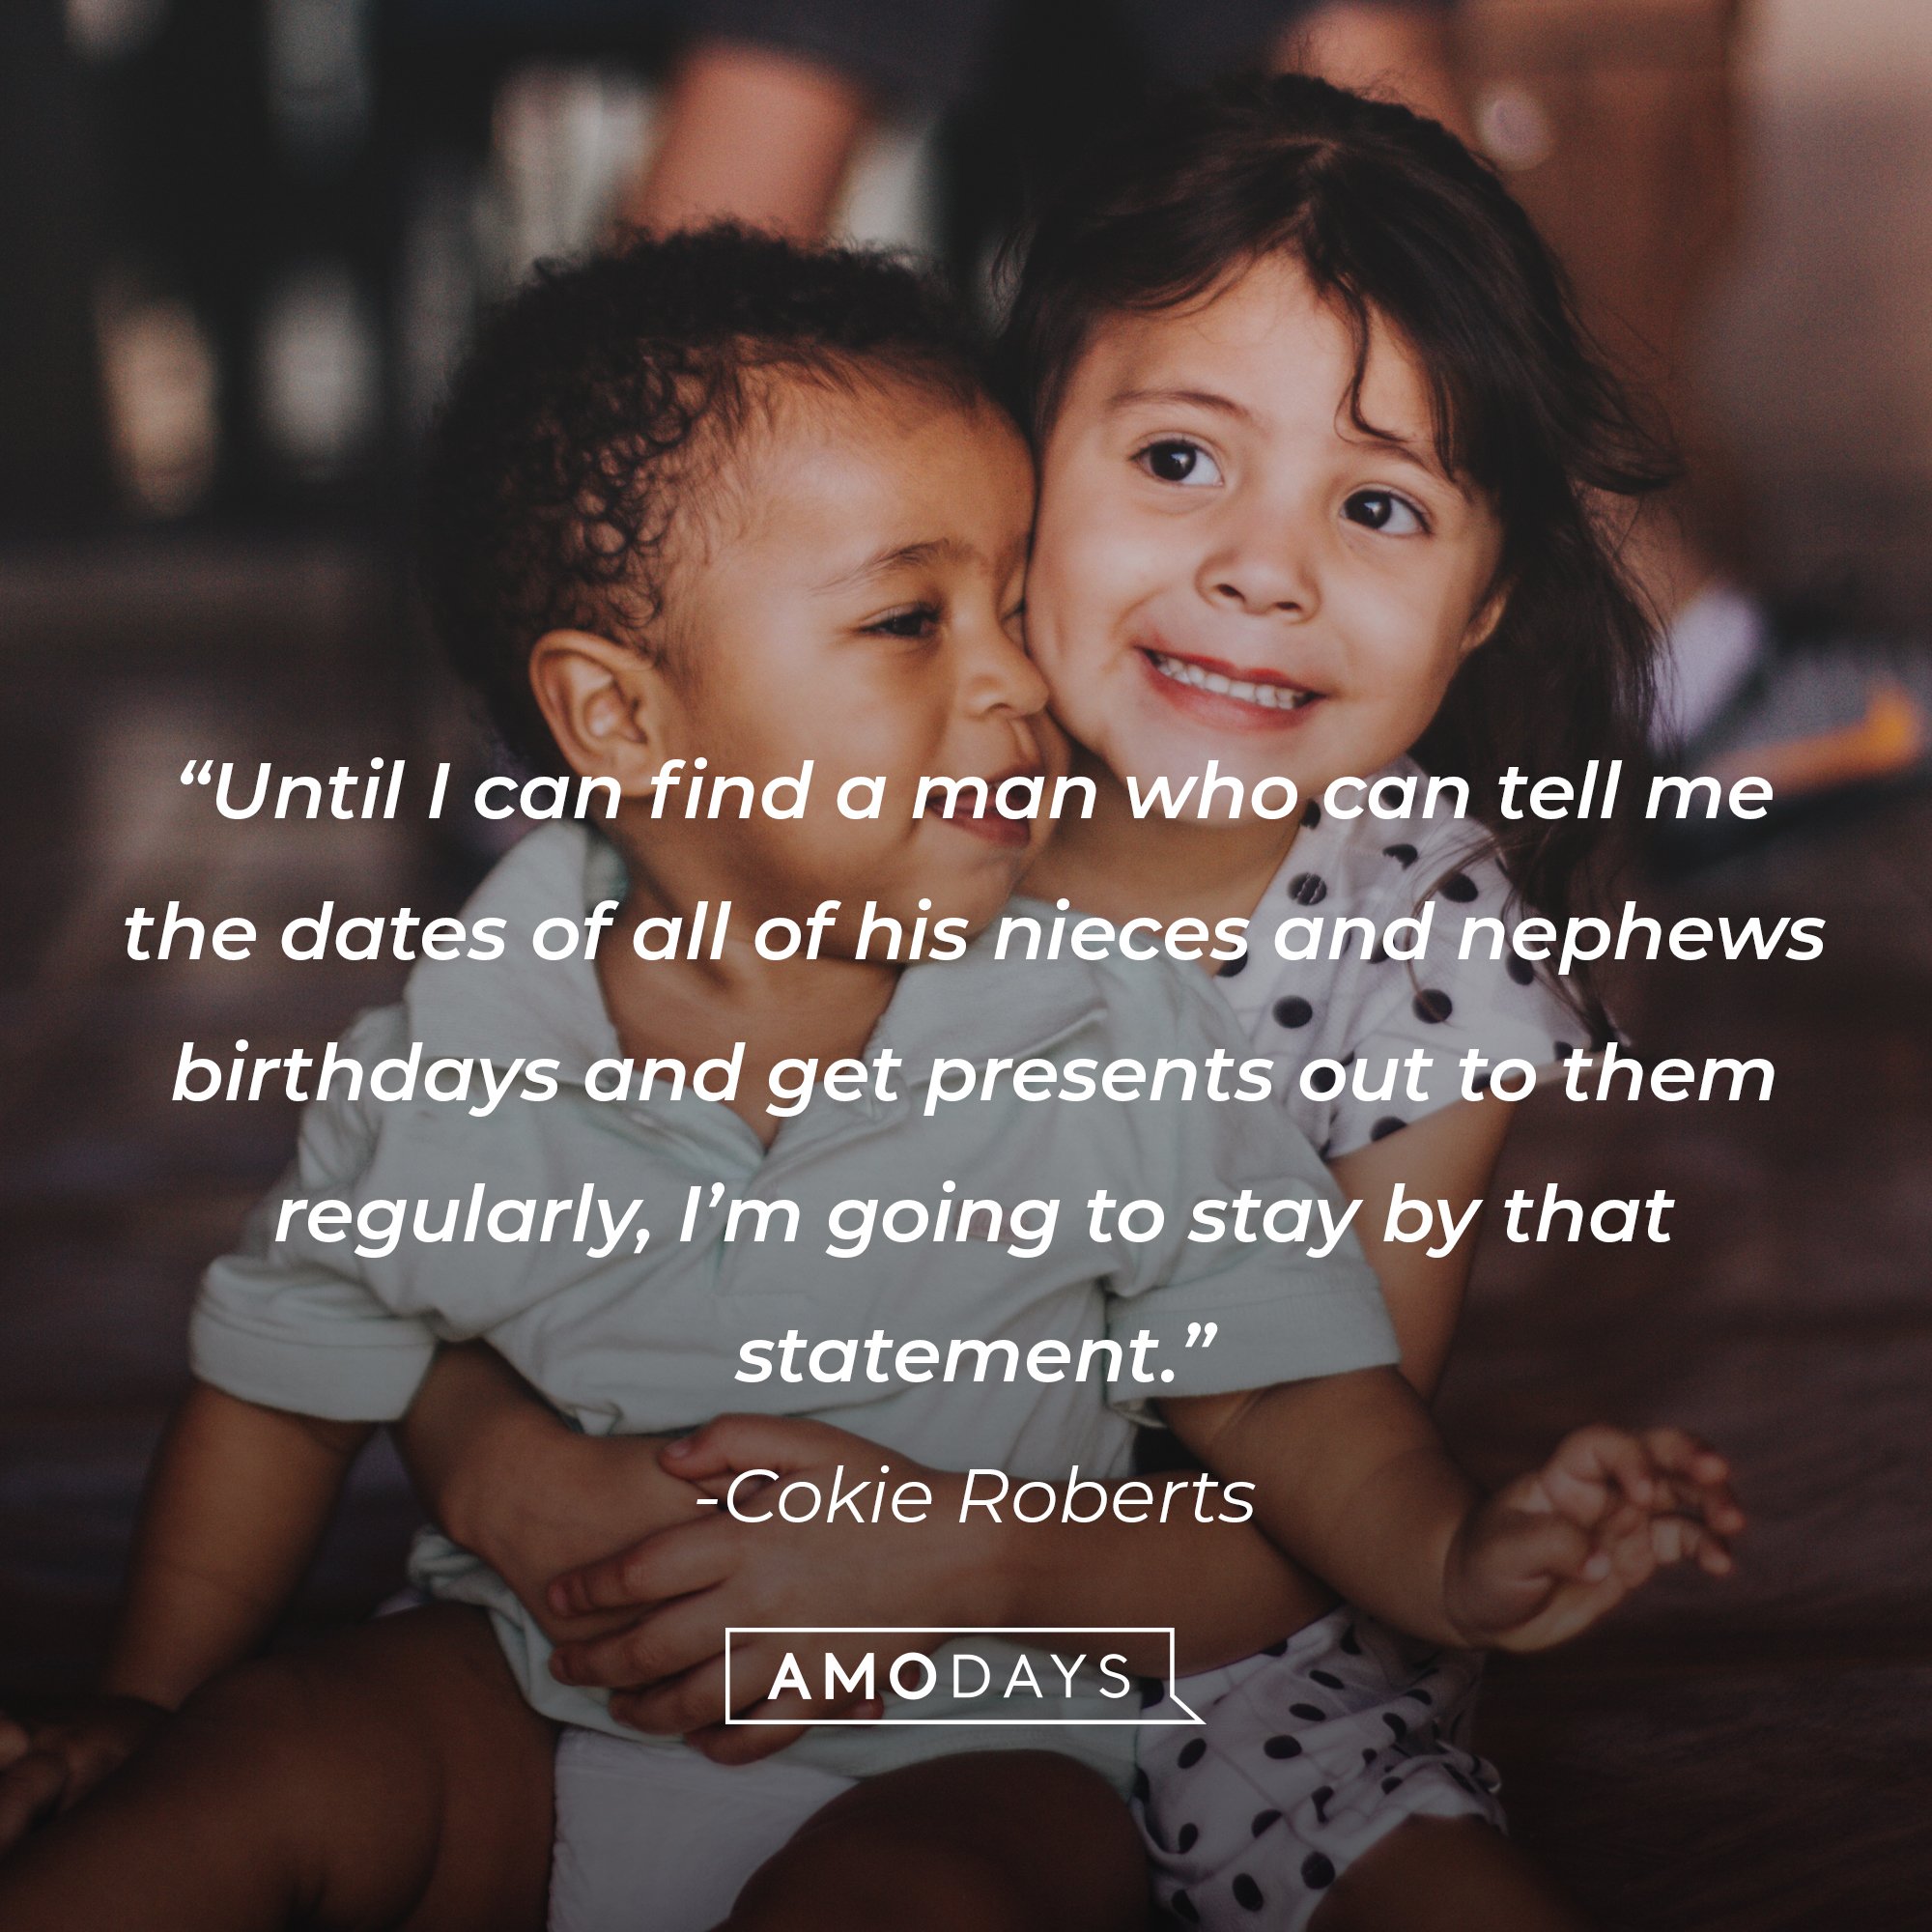 Cokie Roberts' quote: “Until I can find a man who can tell me the dates of all of his nieces and nephews birthdays and get presents out to them regularly, I’m going to stay by that statement.” | Image: AmoDays